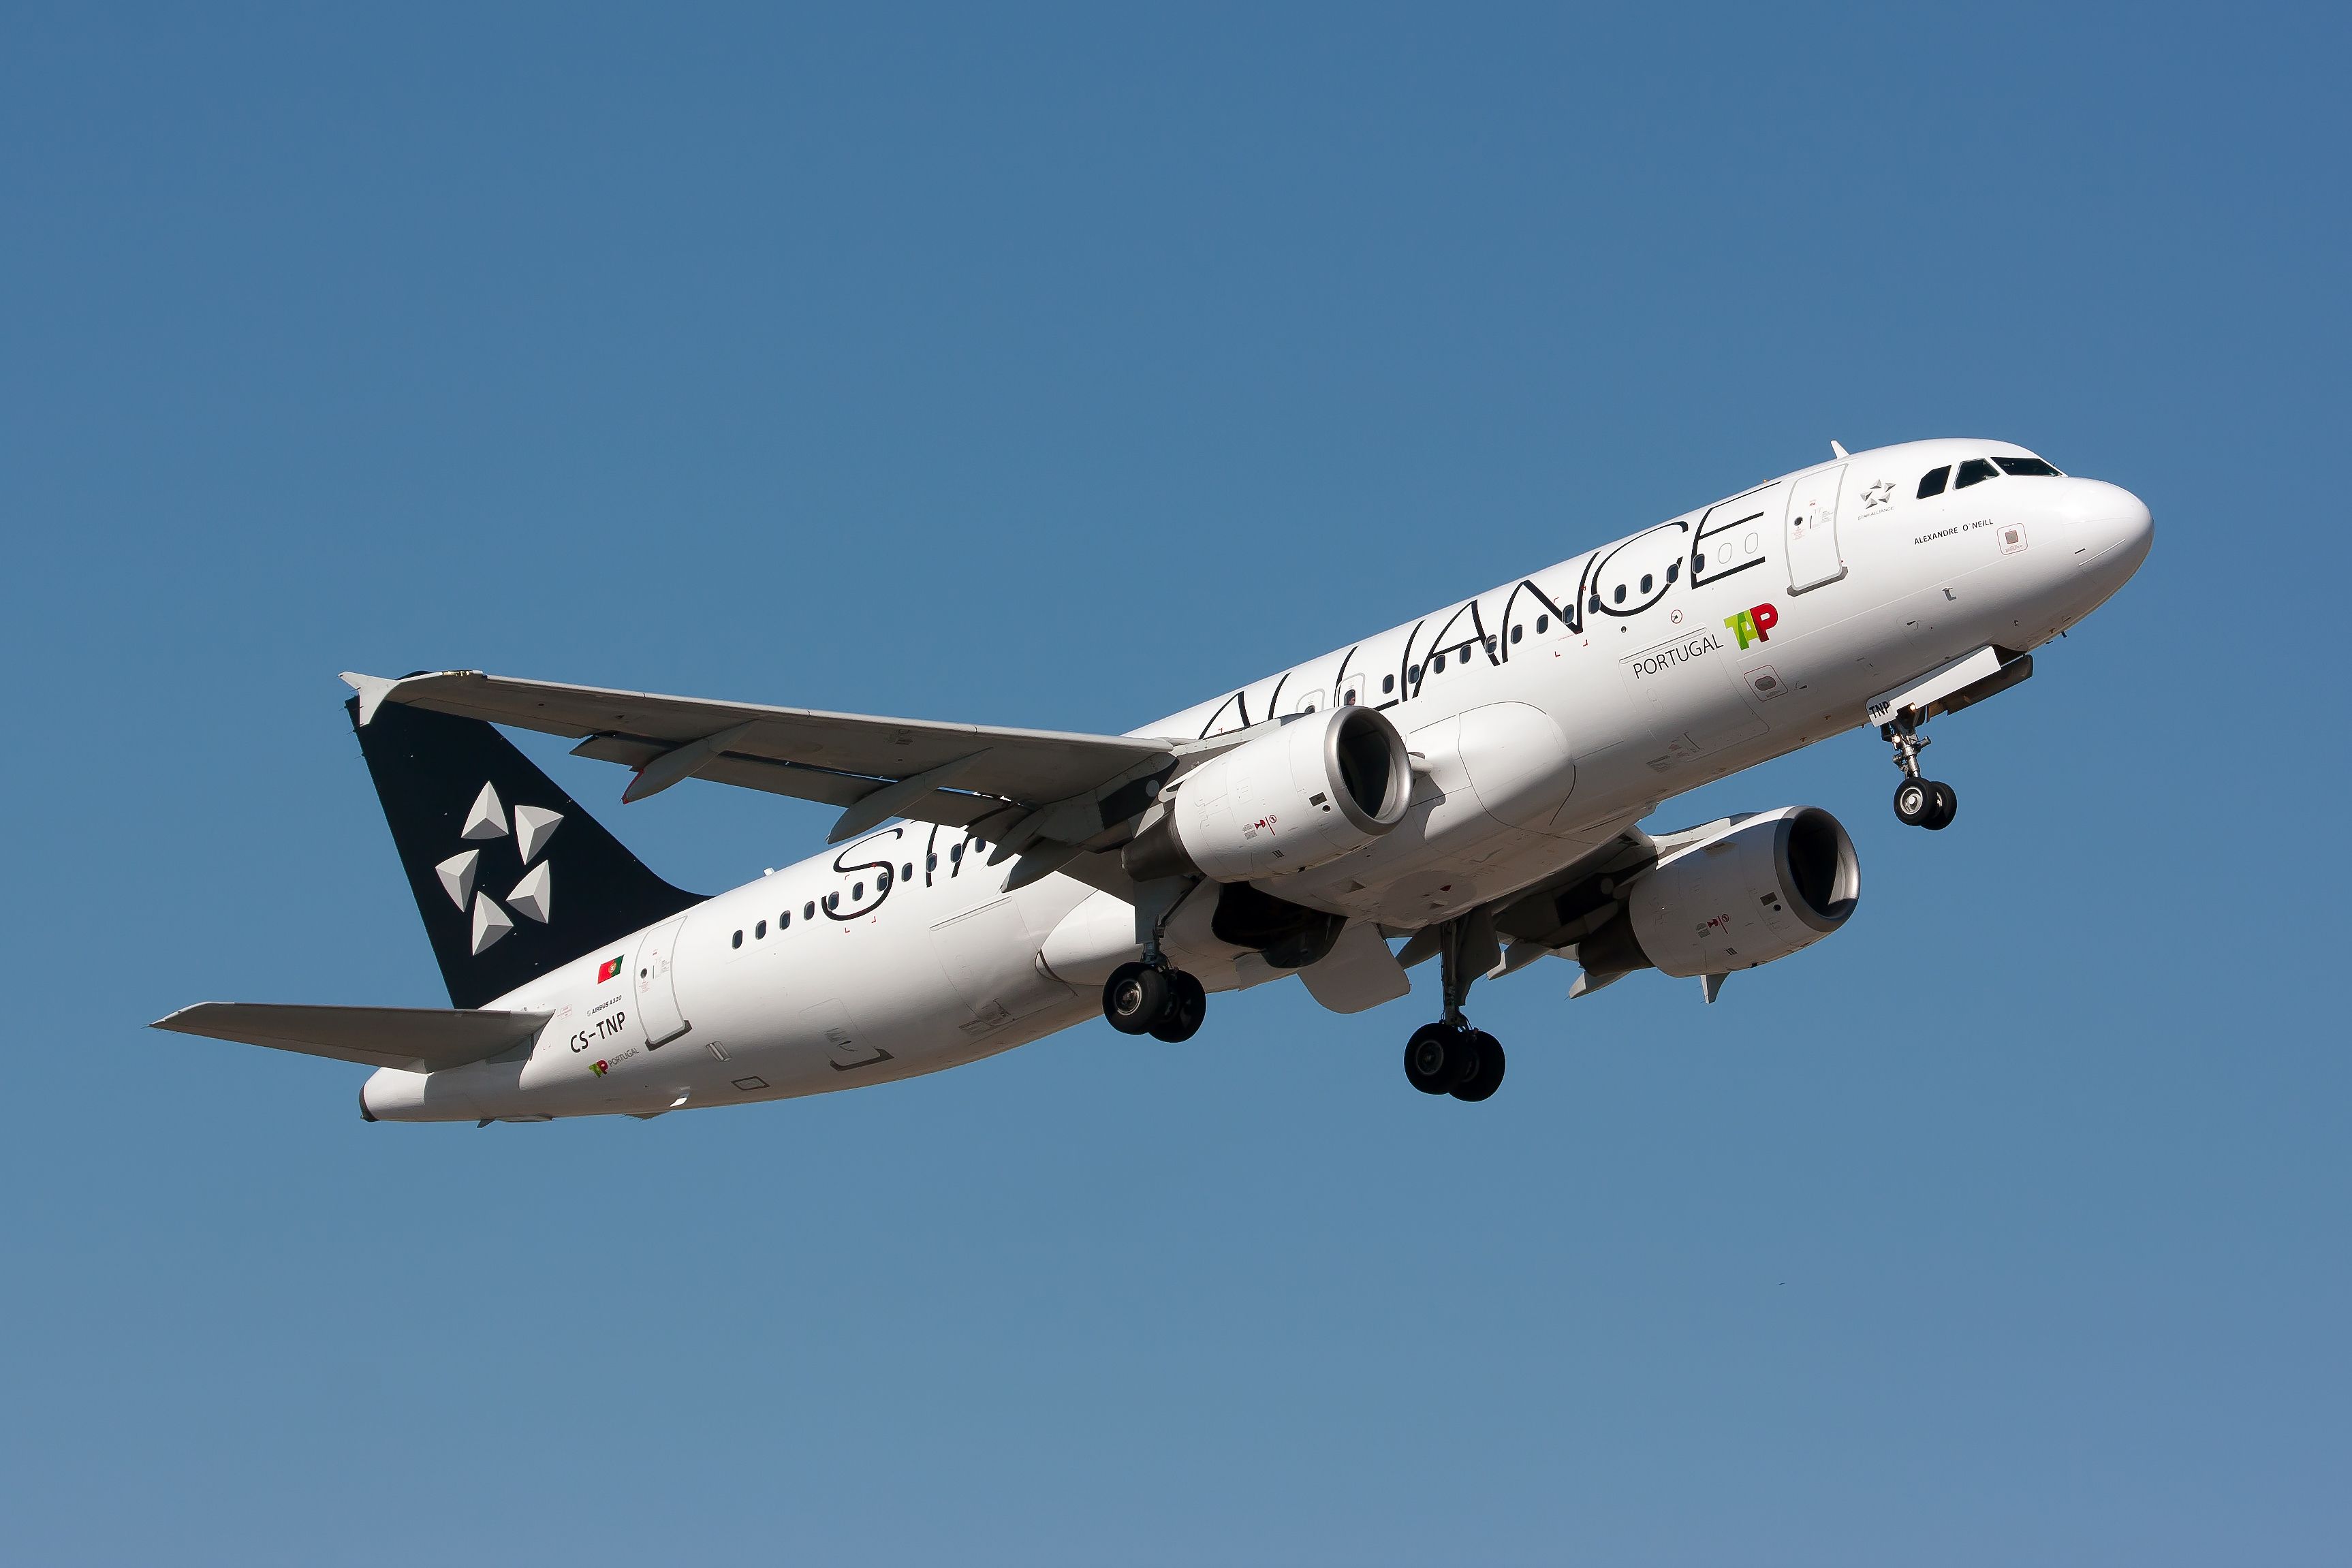 TAP A320 with star alliance livery